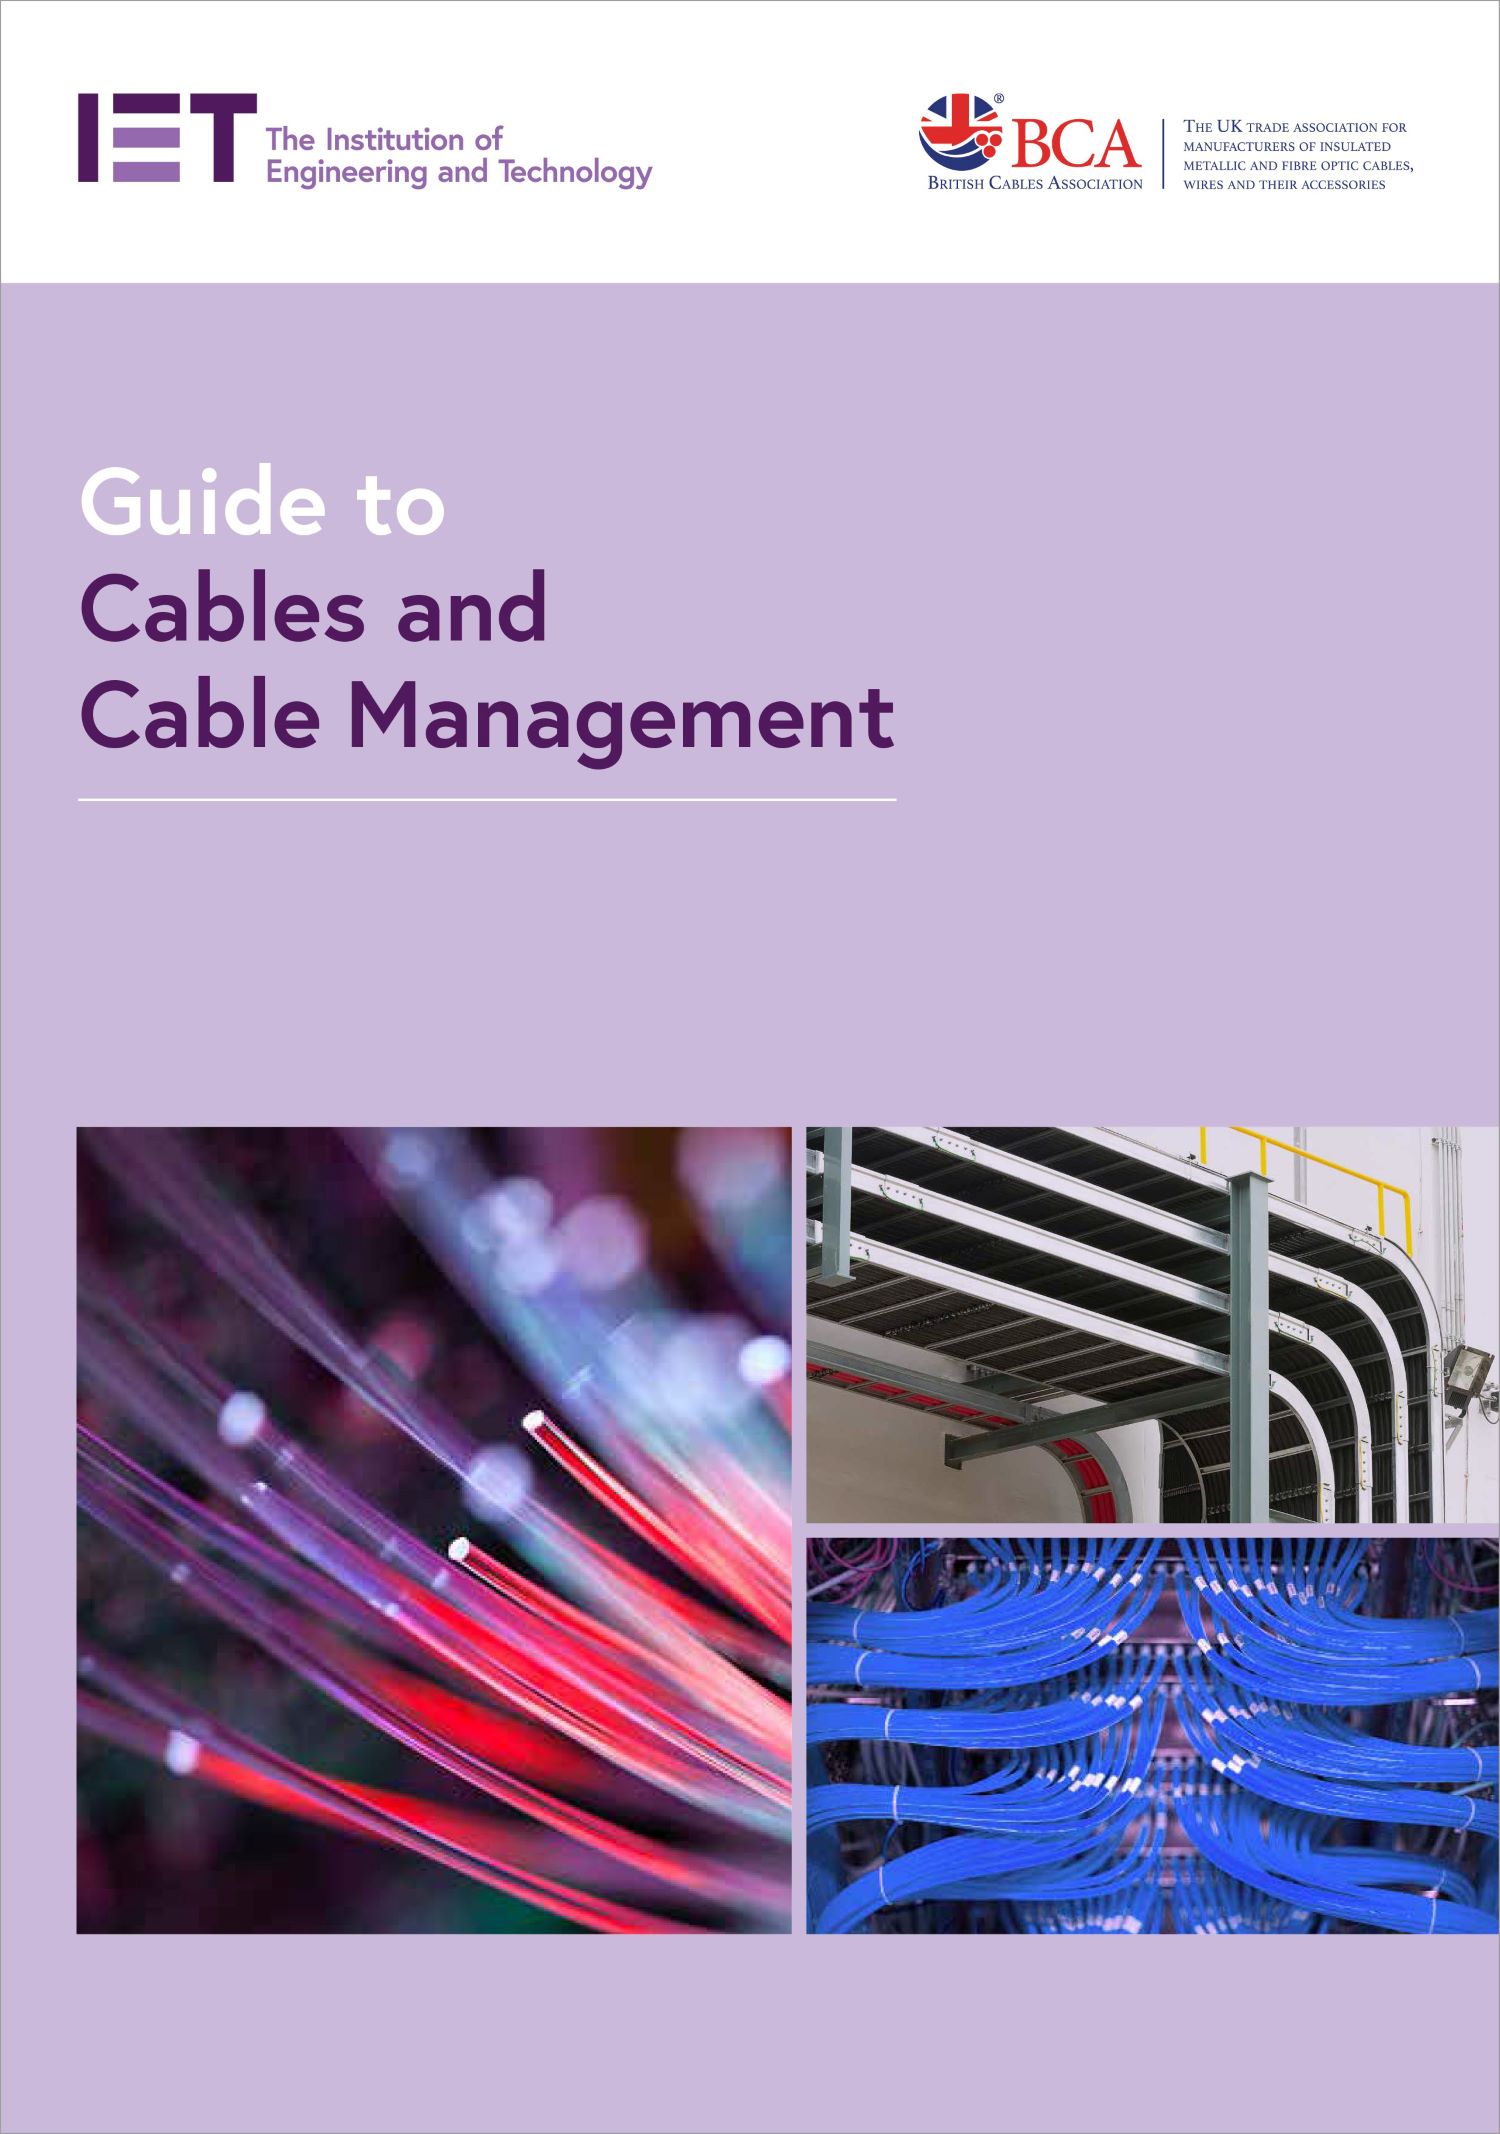 Guide to Cables and Cable Management